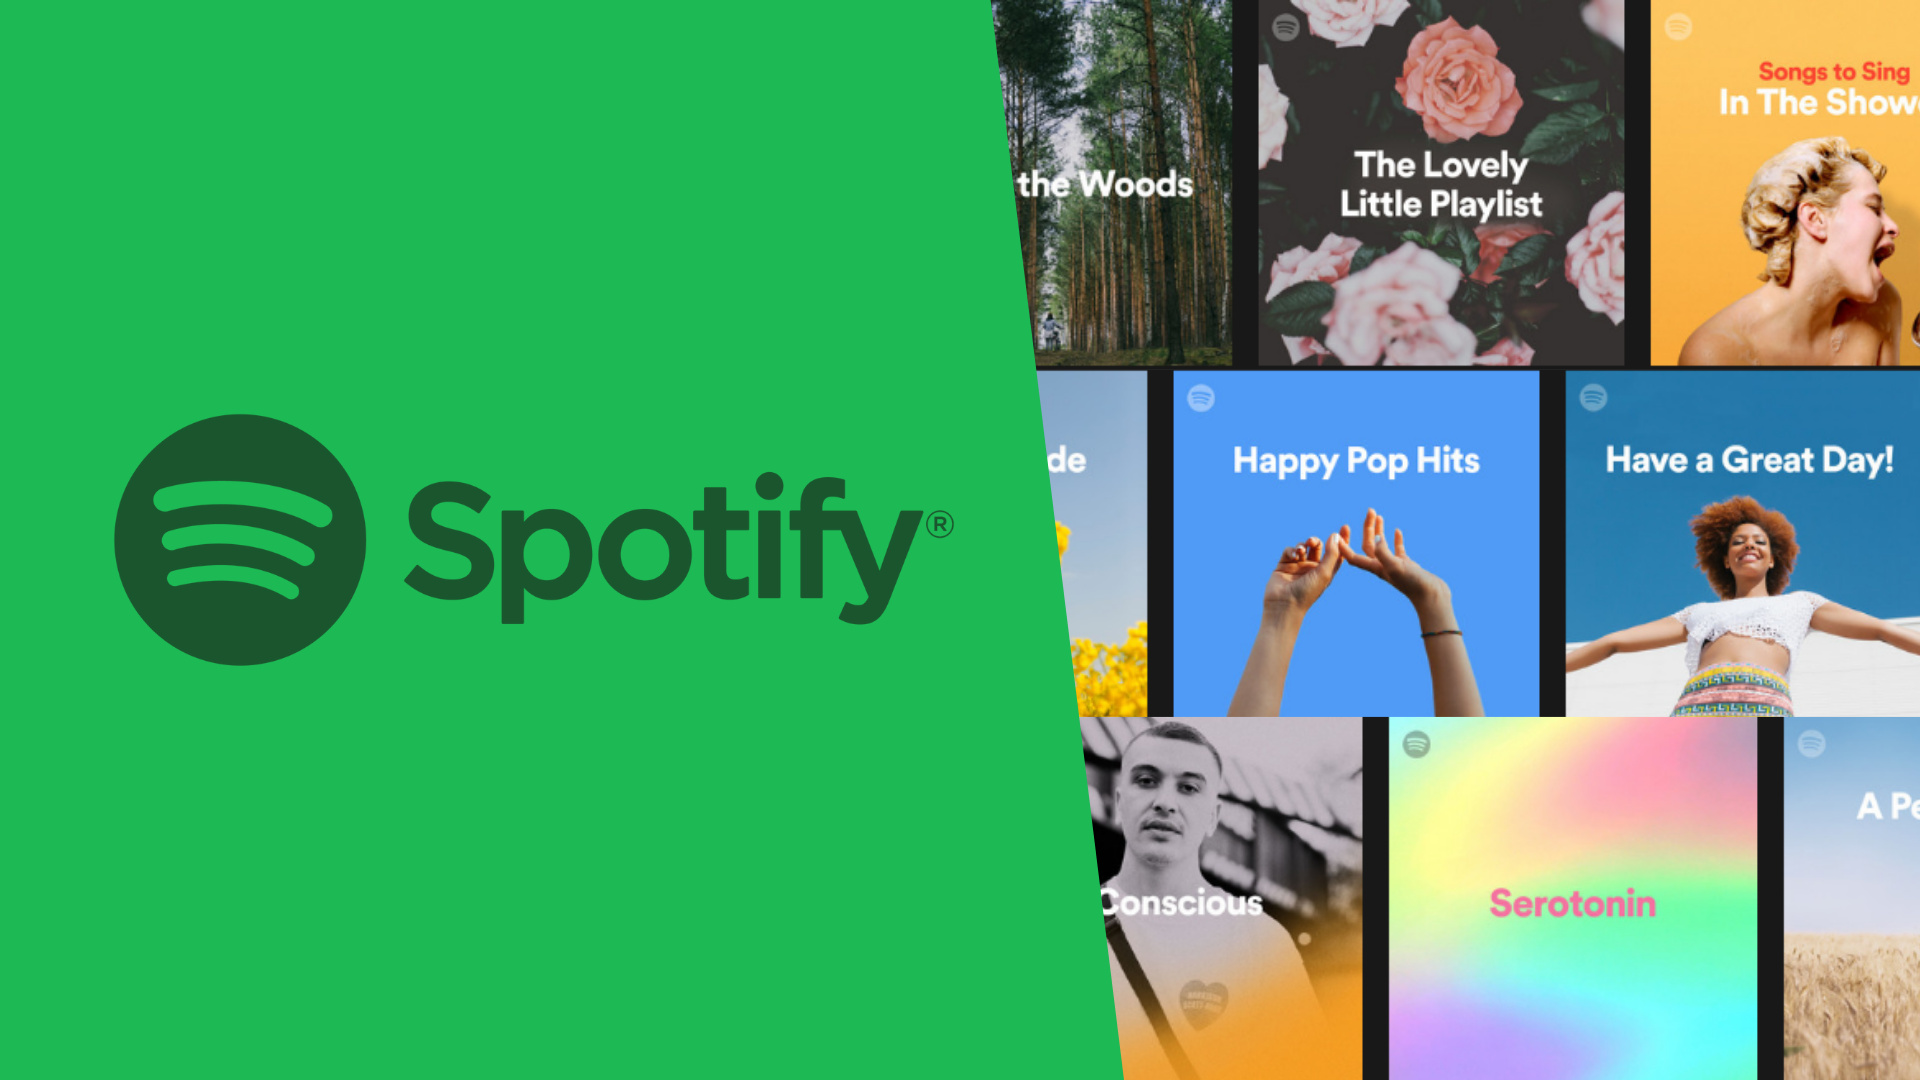 Spotify: A Swedish audio streaming and media services provider, Playlists. 1920x1080 Full HD Background.